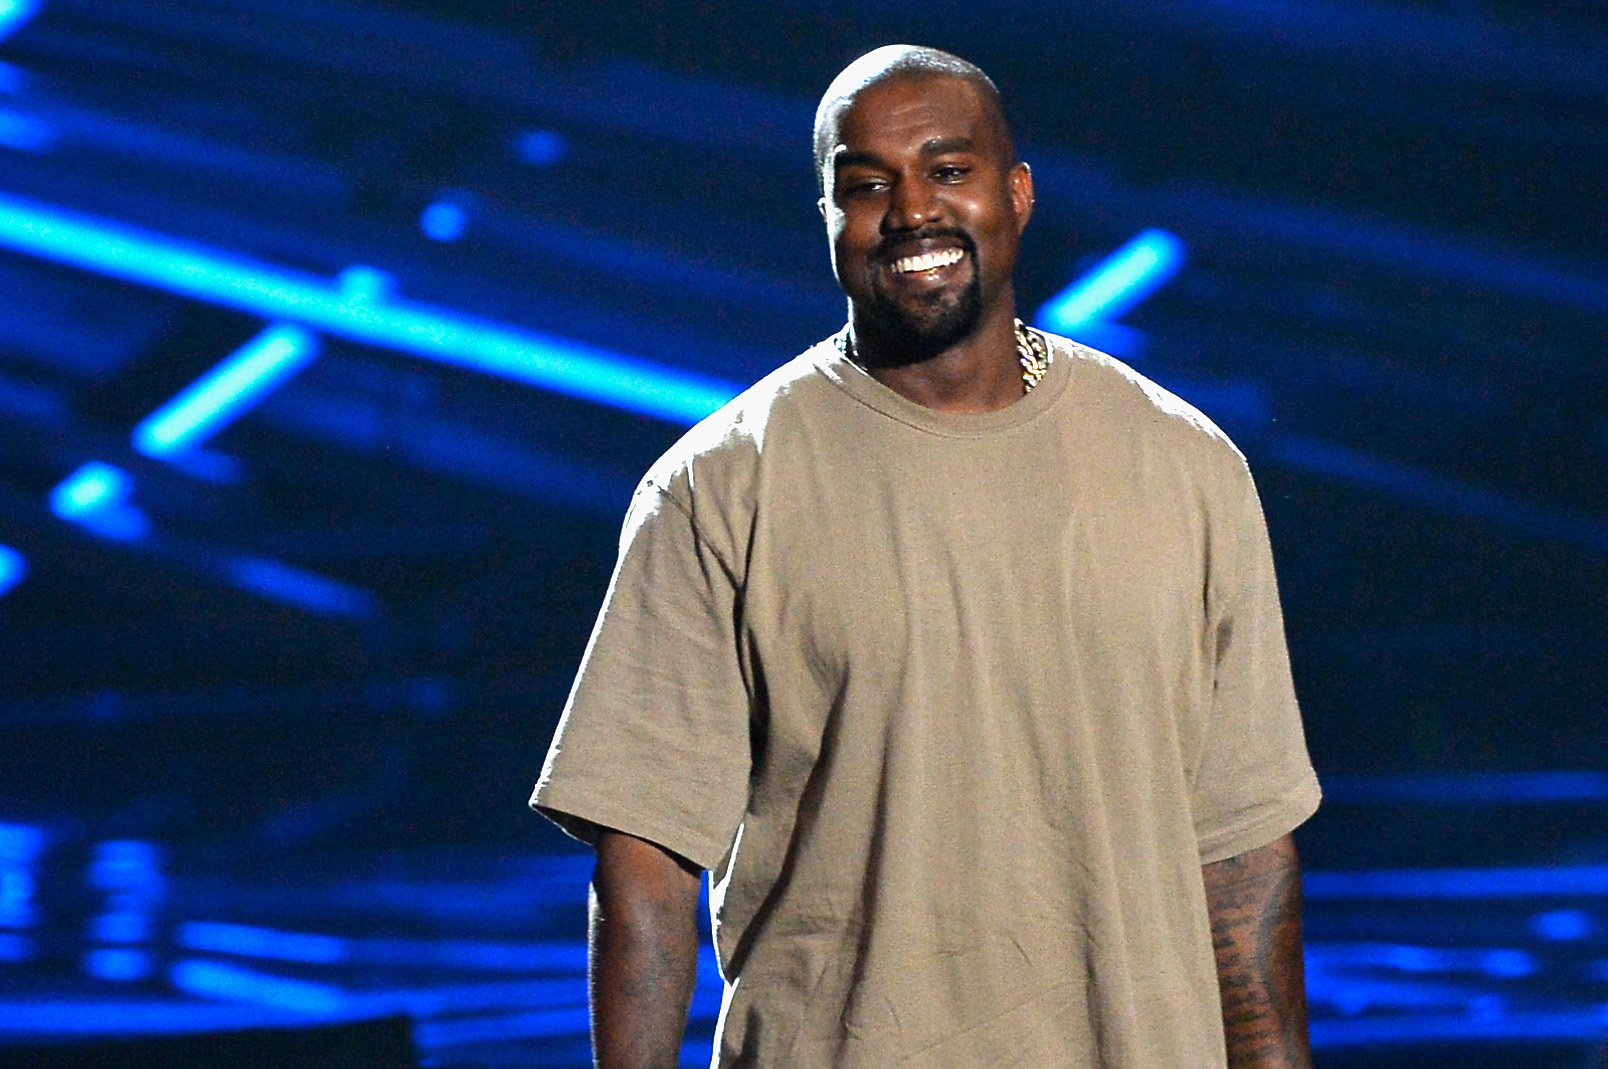 Kanye West live on stage at the MTV VMAs 2015